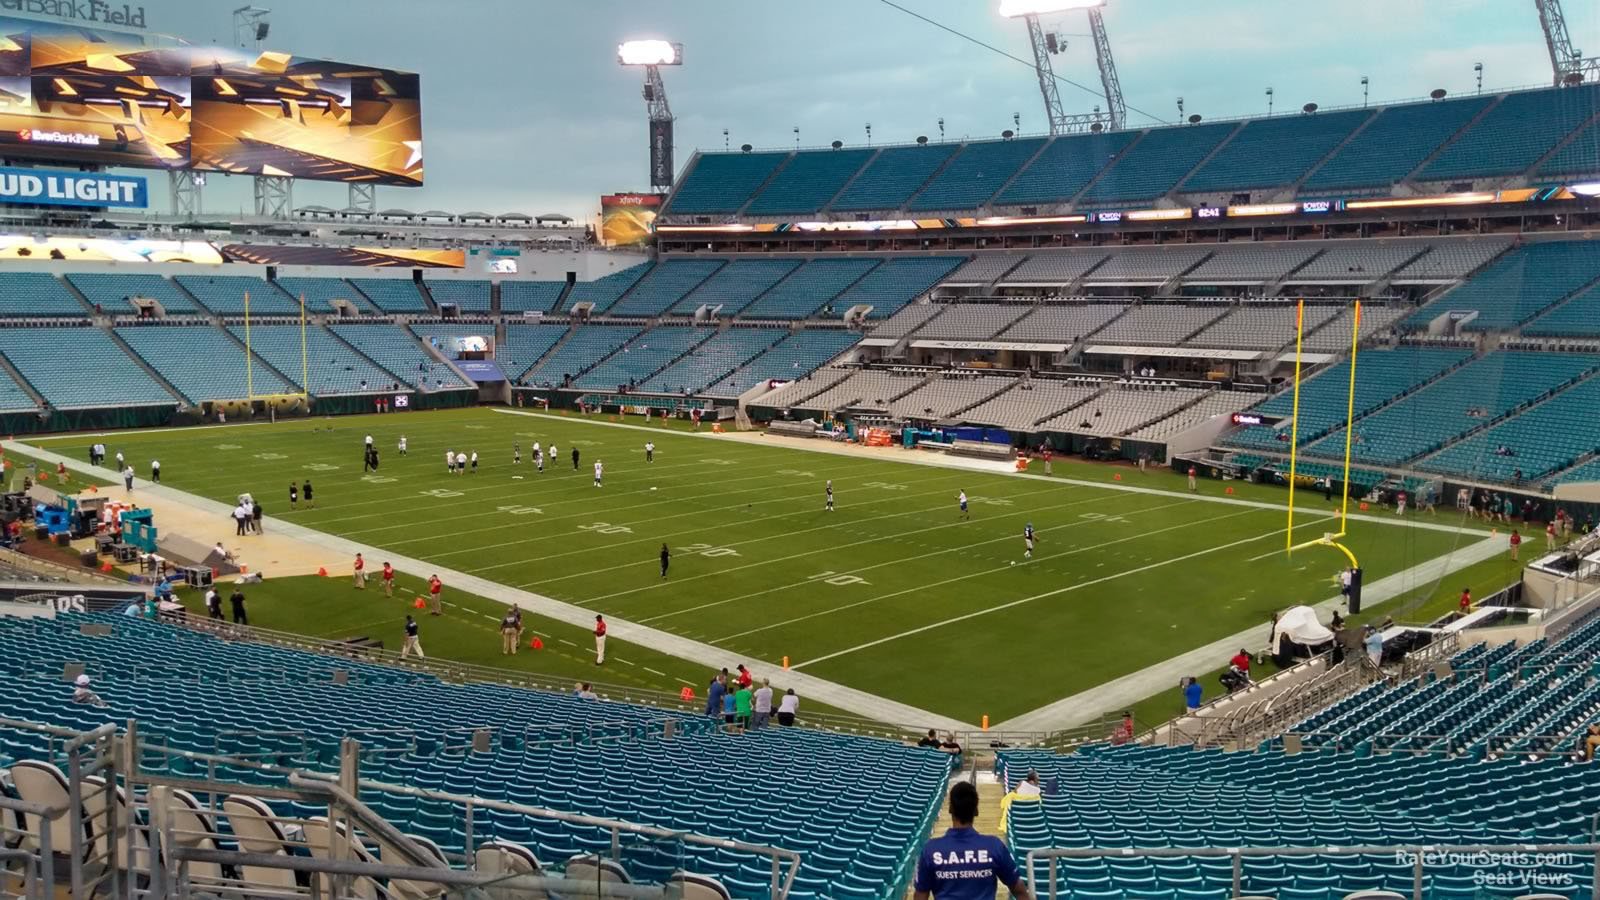 section 202, row g seat view  - tiaa bank field